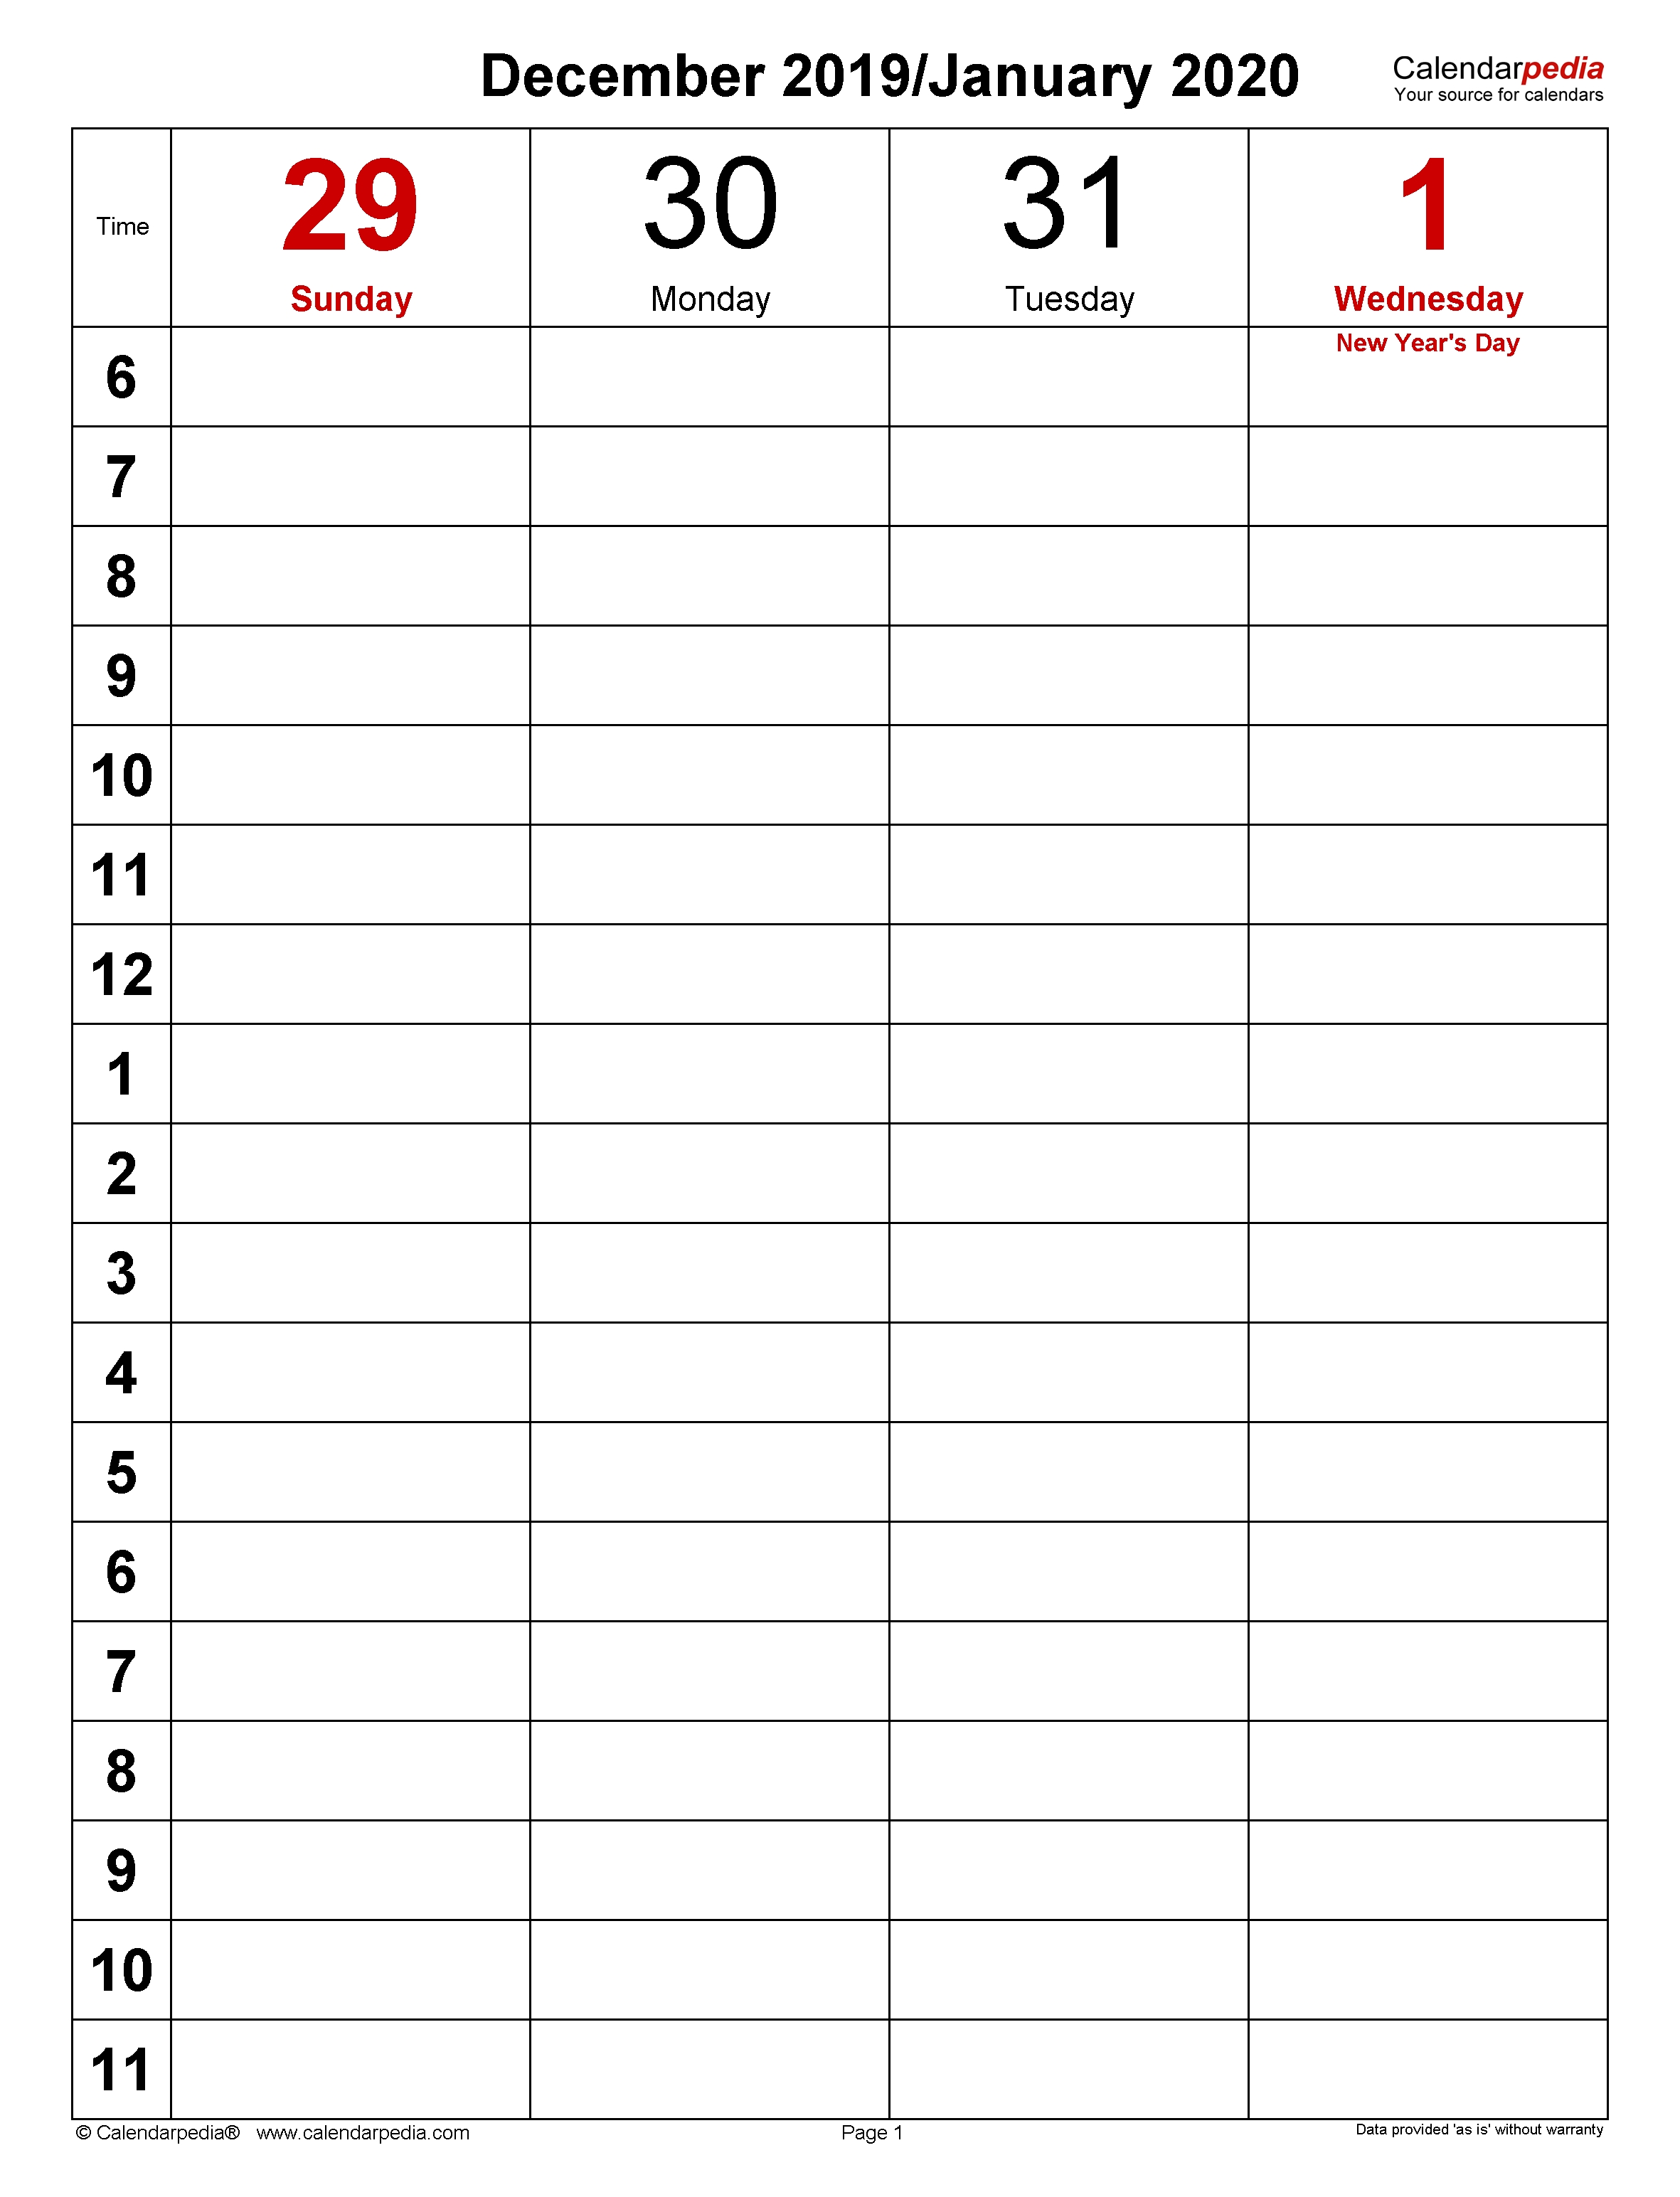 Weekly Calendars 2020 For Pdf - 12 Free Printable Templates